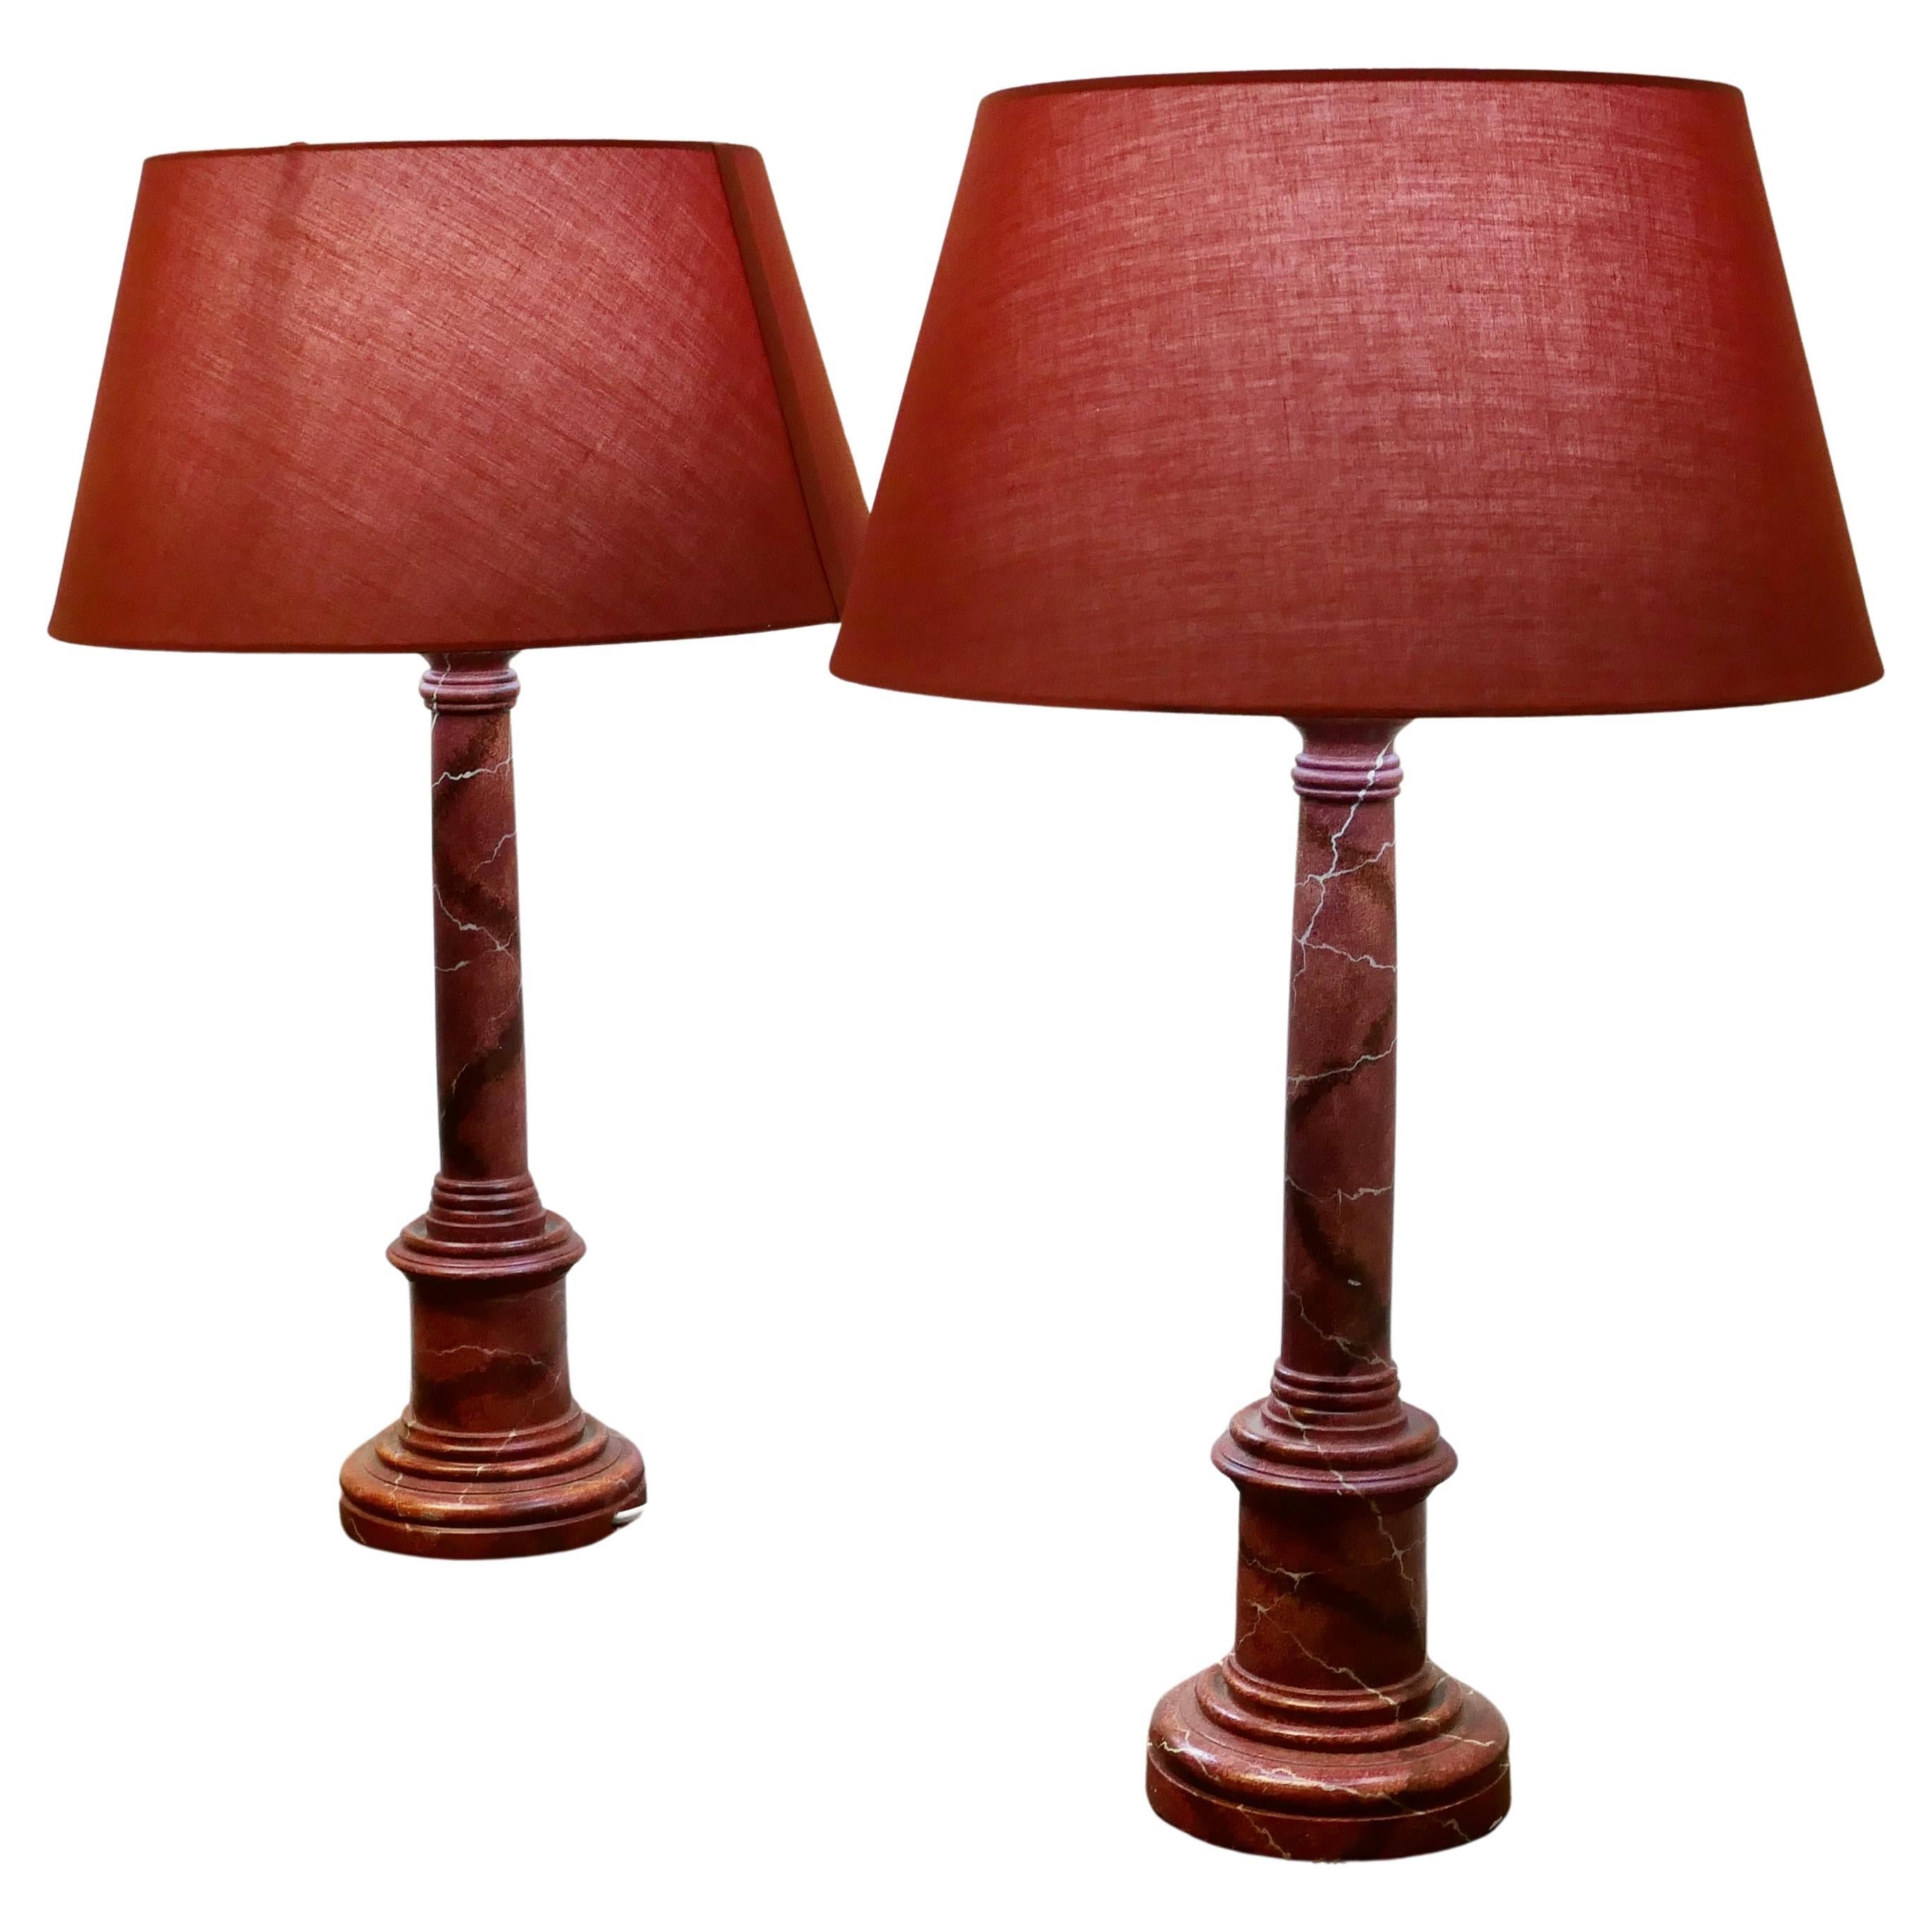 A Pair of Tall Simulated Marble Bedside Lamps with Shades   